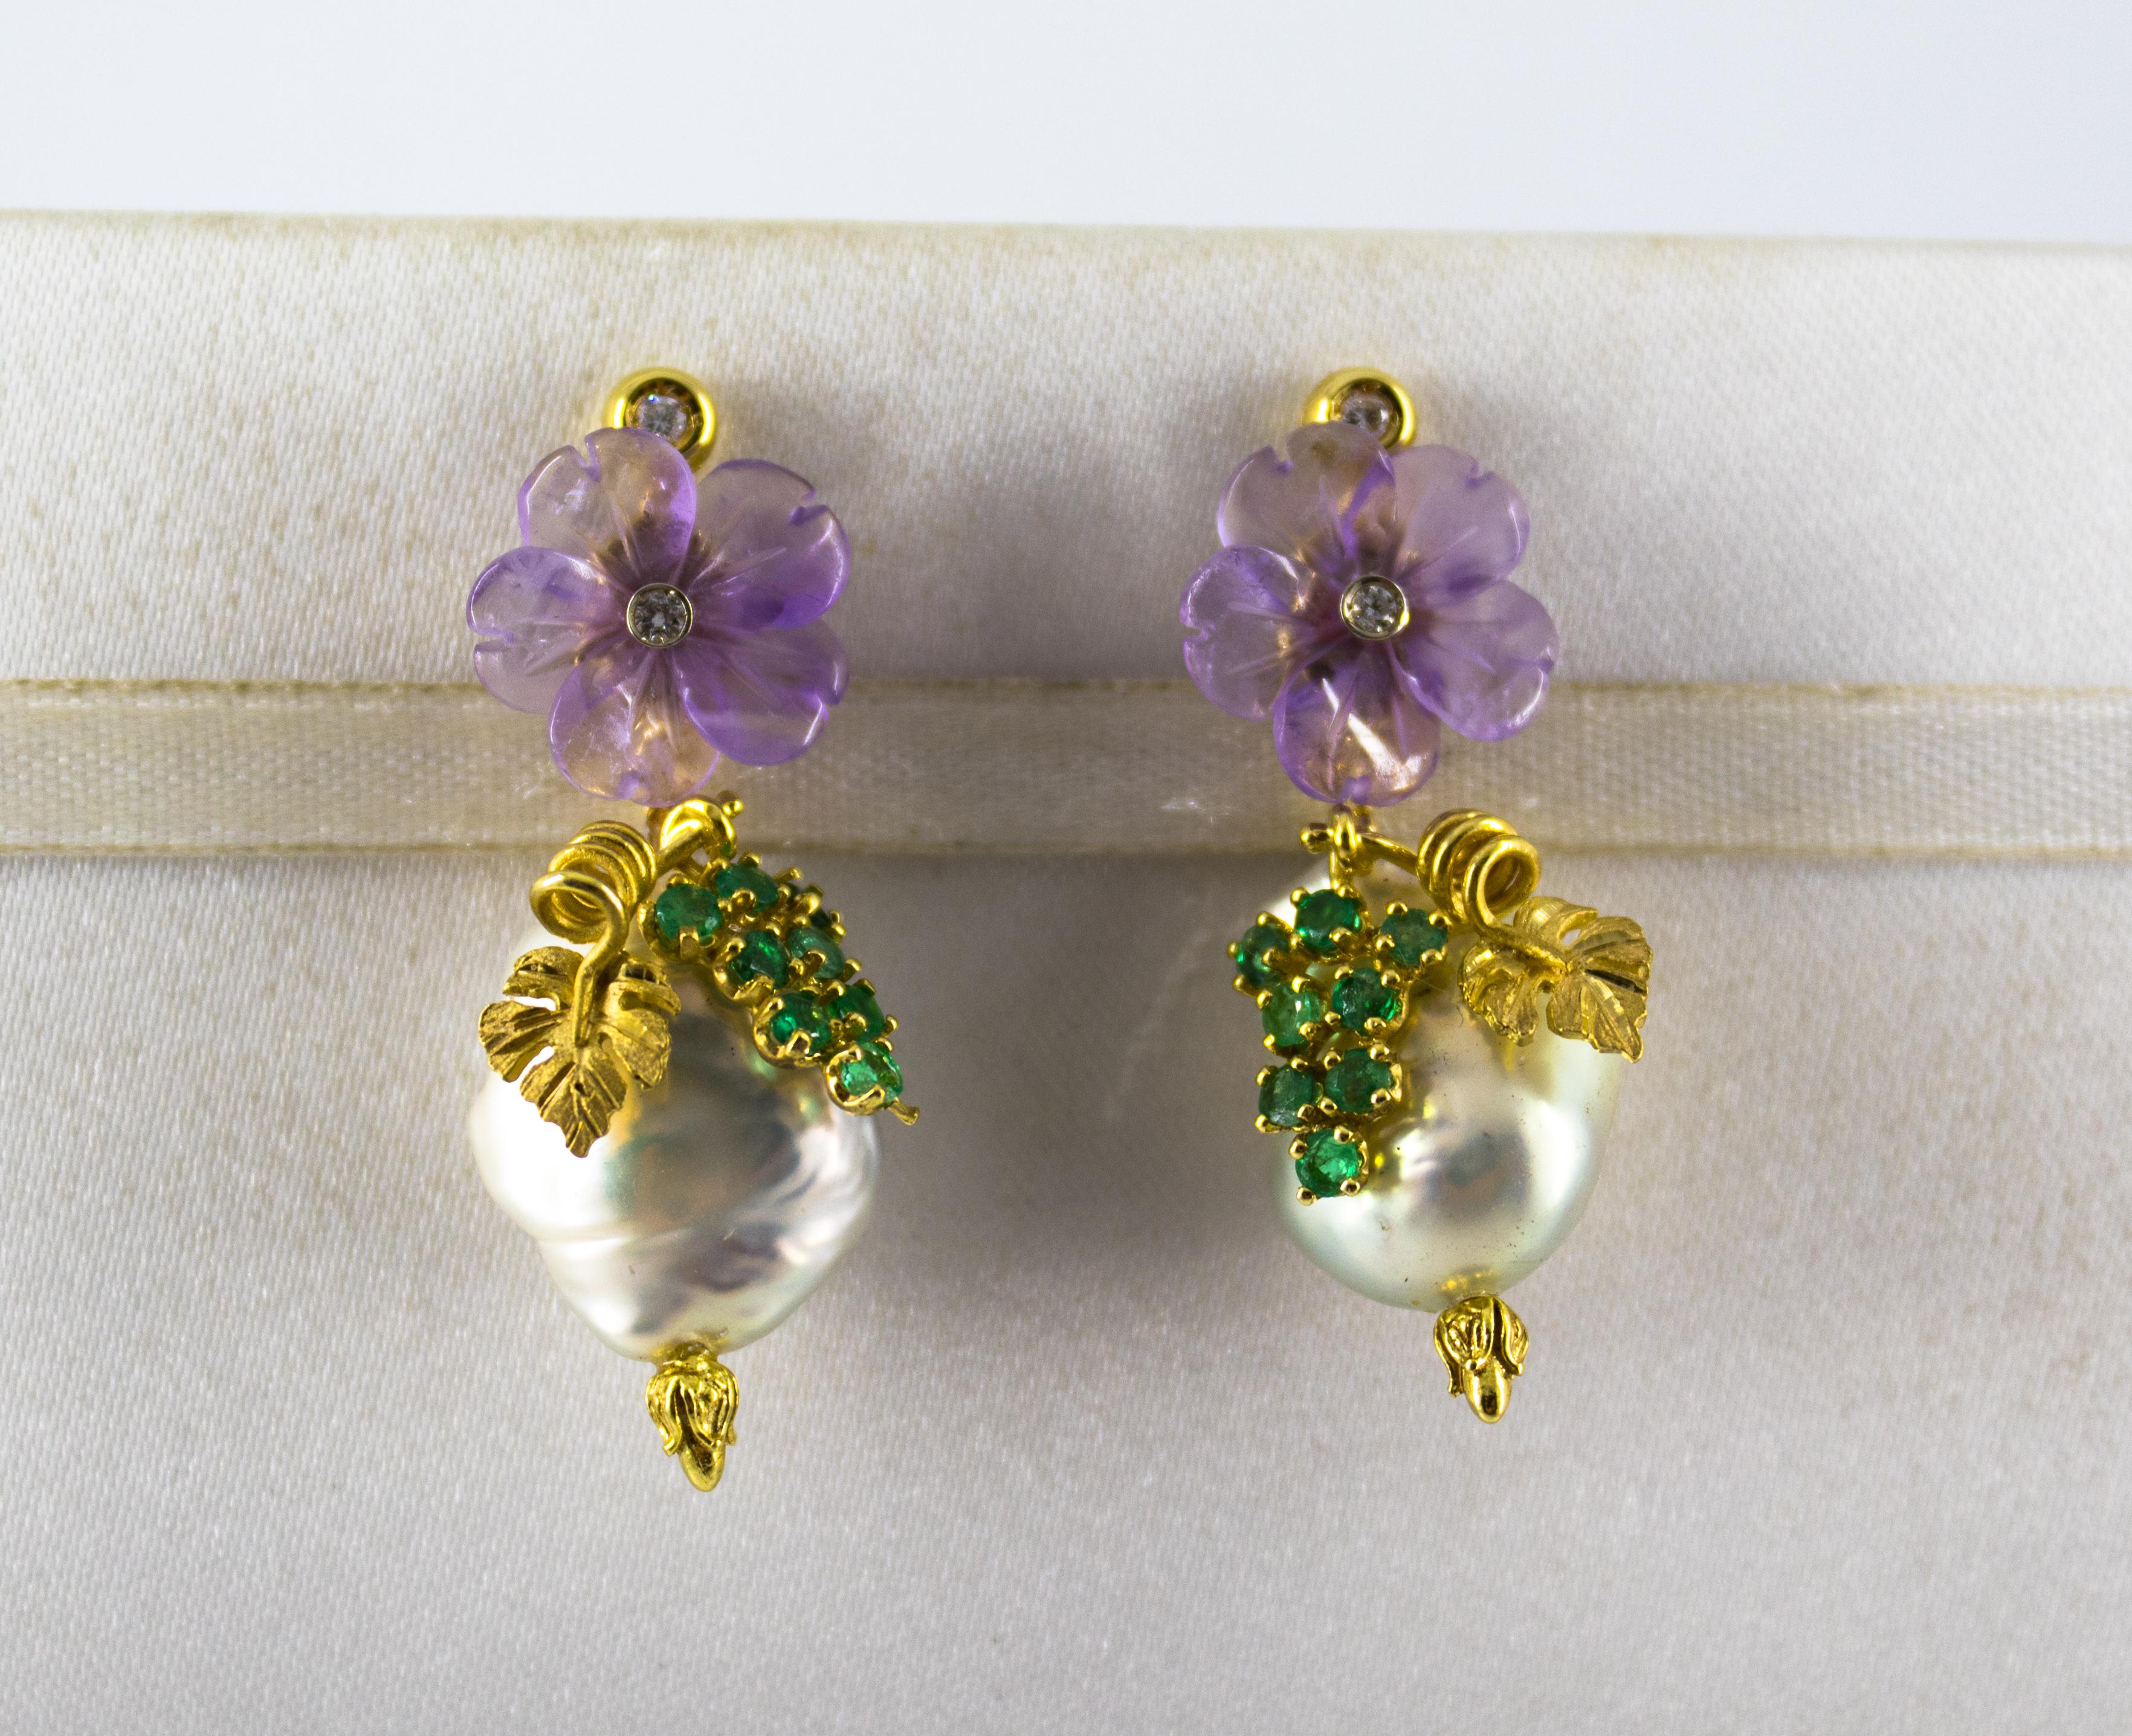 These Stud Earrings are made of 14K Yellow Gold.
These Earrings have 0.12 Carats of White Brilliant Cut Diamonds.
These Earrings have 0.90 Carats of Emeralds.
These Earrings have also Pearls and Amethyst.
These Earrings are available also with Green